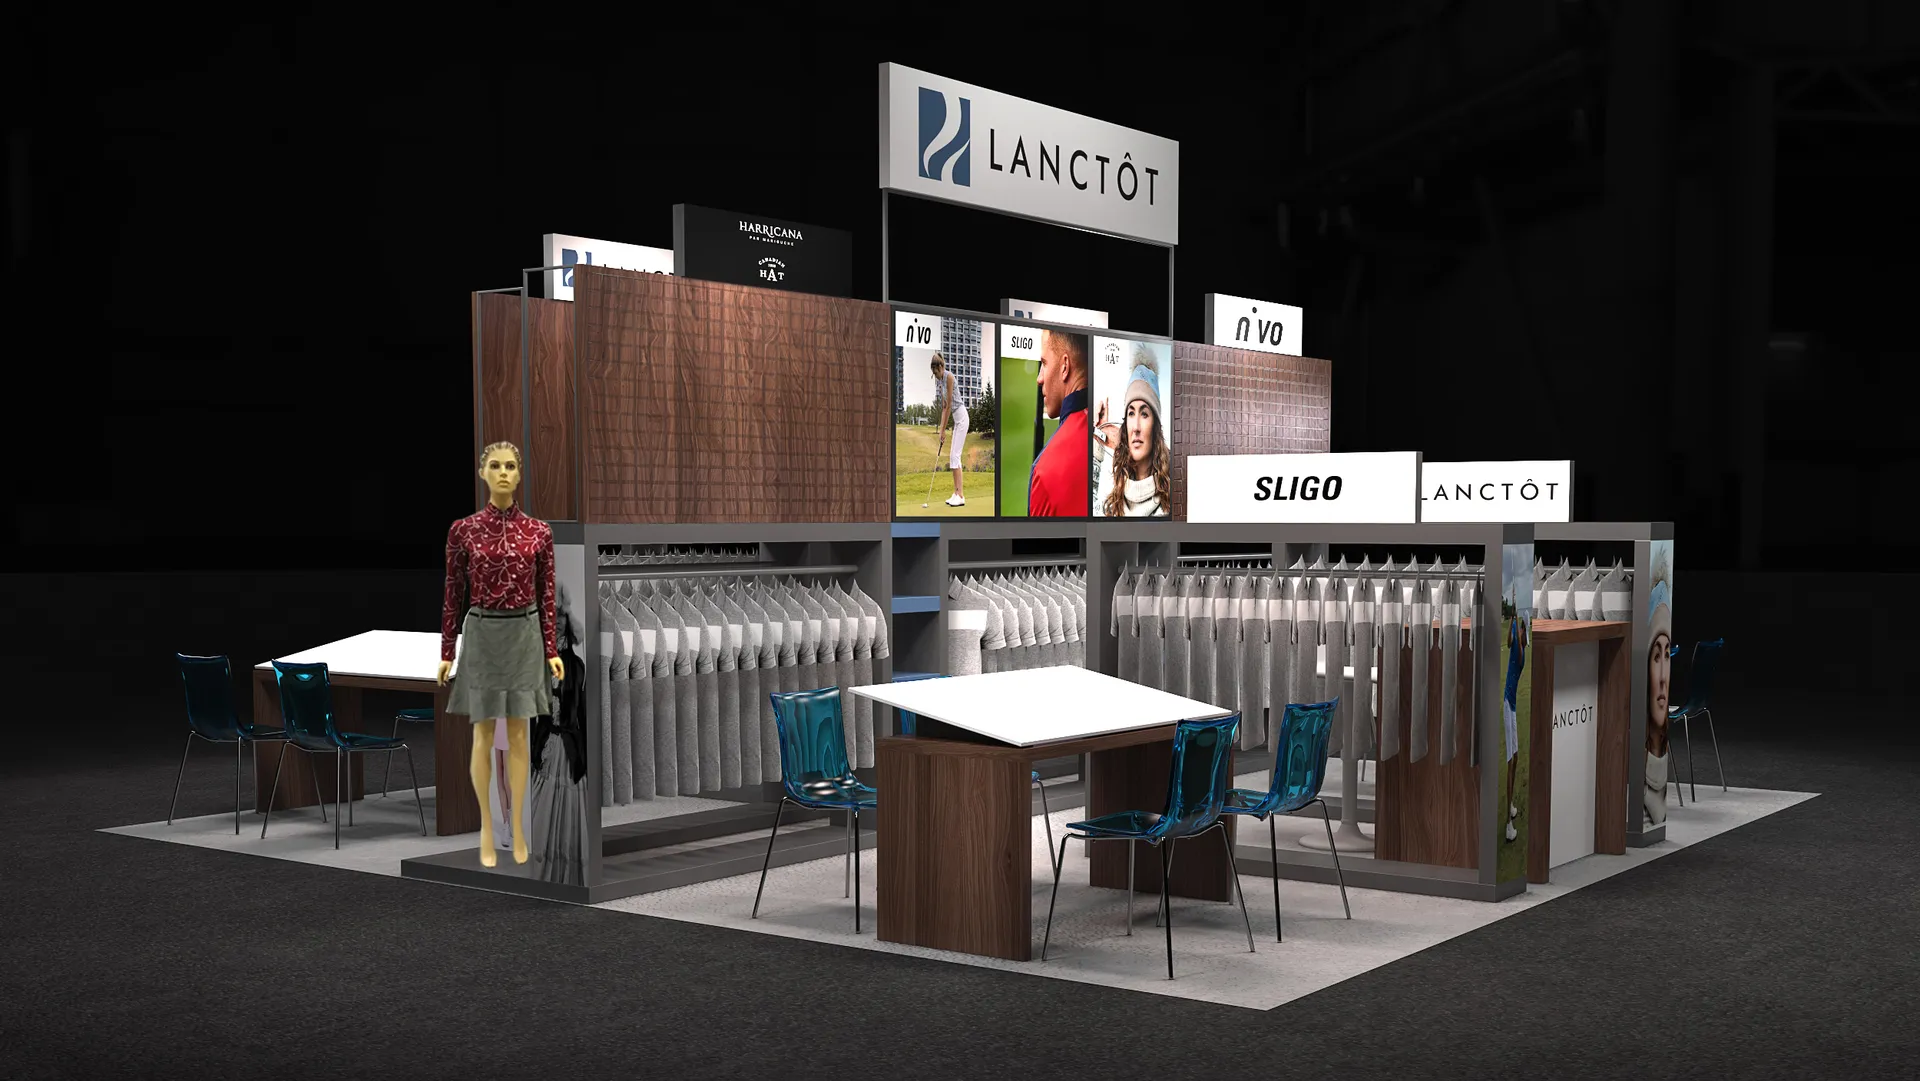 booth-design-projects/The Reaction Space/2024-04-11-20x20-ISLAND-Project-25/Lanctot_Option6-1mzprk.jpg